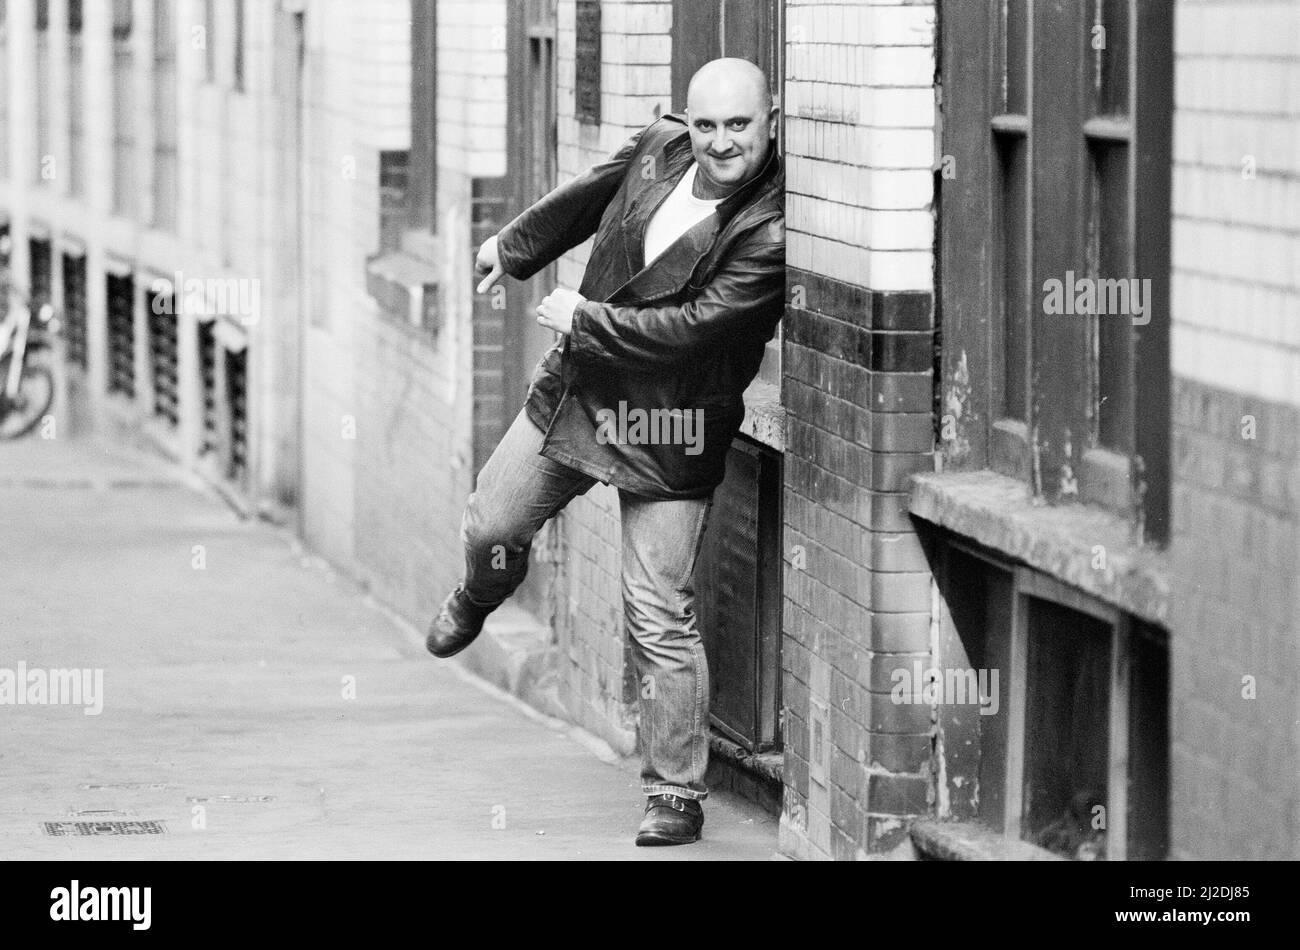 Liverpudlian comedian Alexei Sayle who starred in the BBC television comedy series The Young Ones, pictured in London. 17th May 1985. Stock Photo